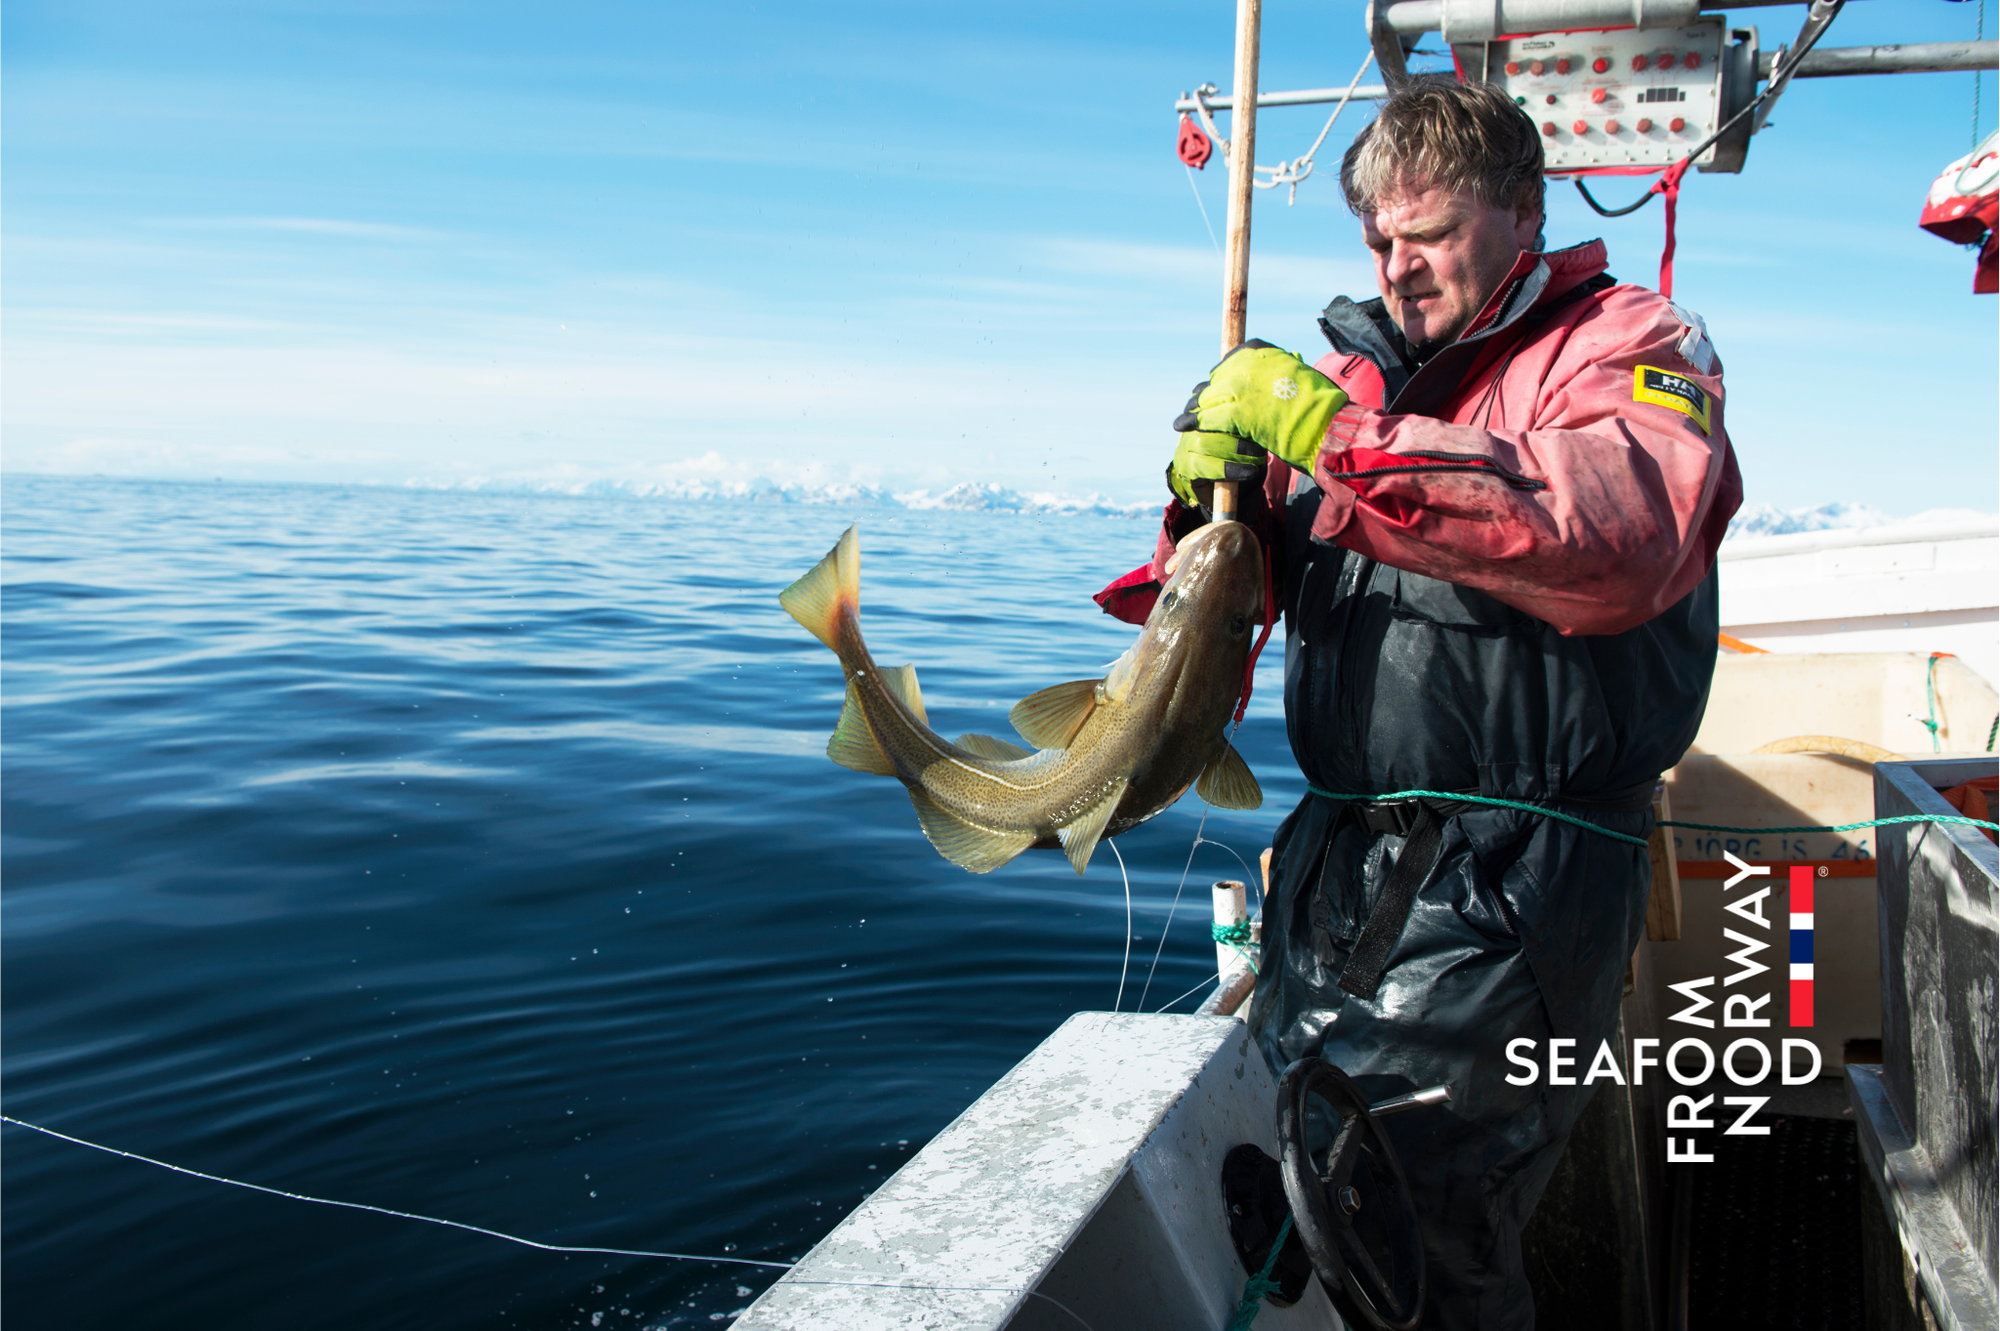 Norway - a global leader in sustainable aquaculture. - Image 1.